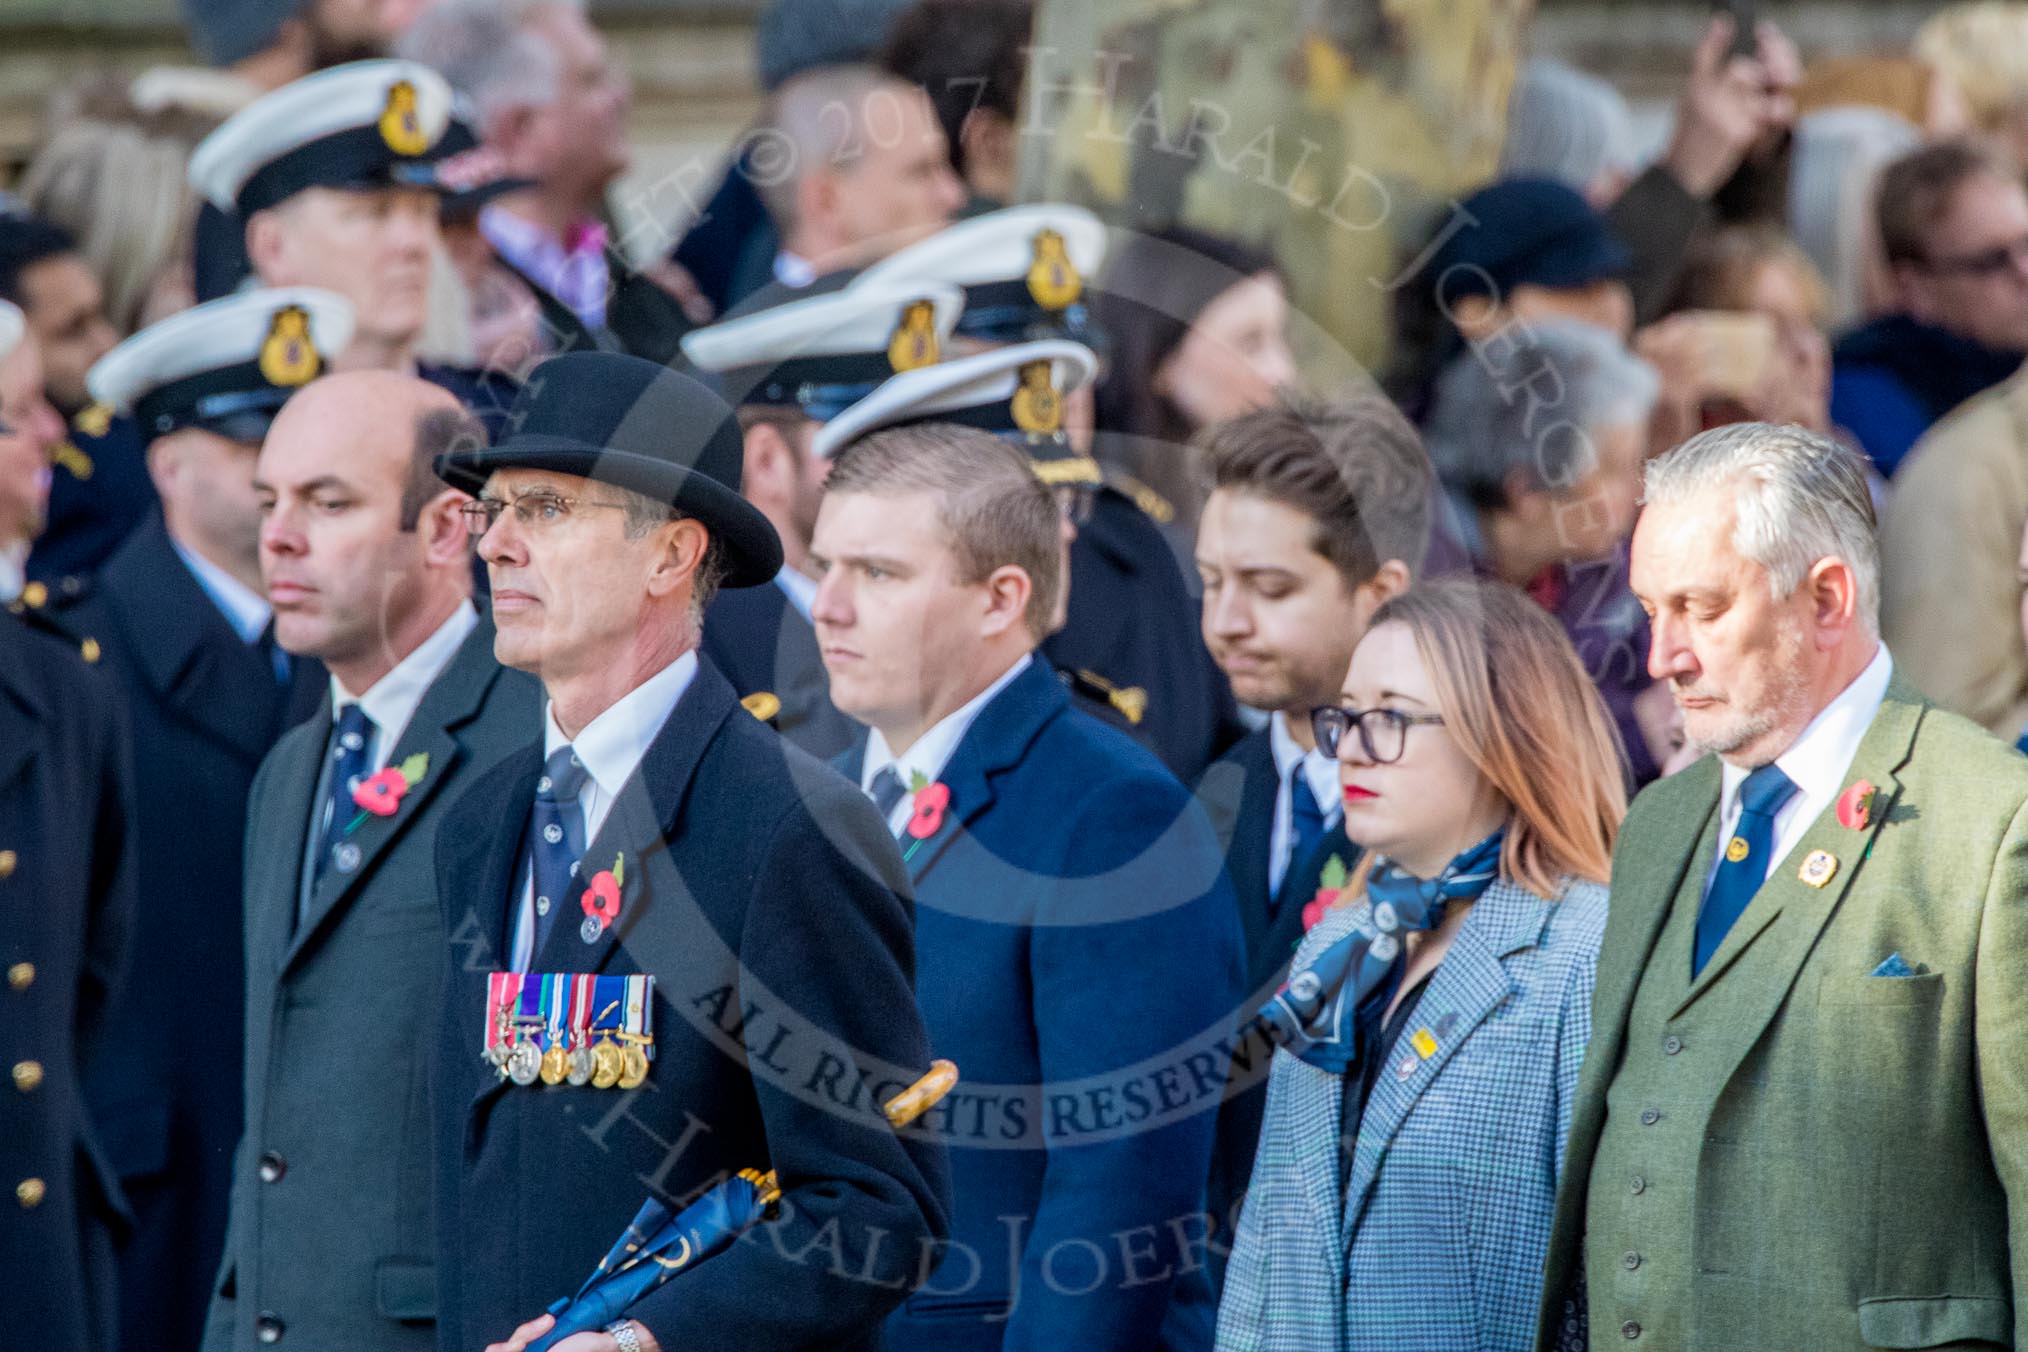 Commonwealth War Graves Commission (Group M50, 19 members) during the Royal British Legion March Past on Remembrance Sunday at the Cenotaph, Whitehall, Westminster, London, 11 November 2018, 12:31.